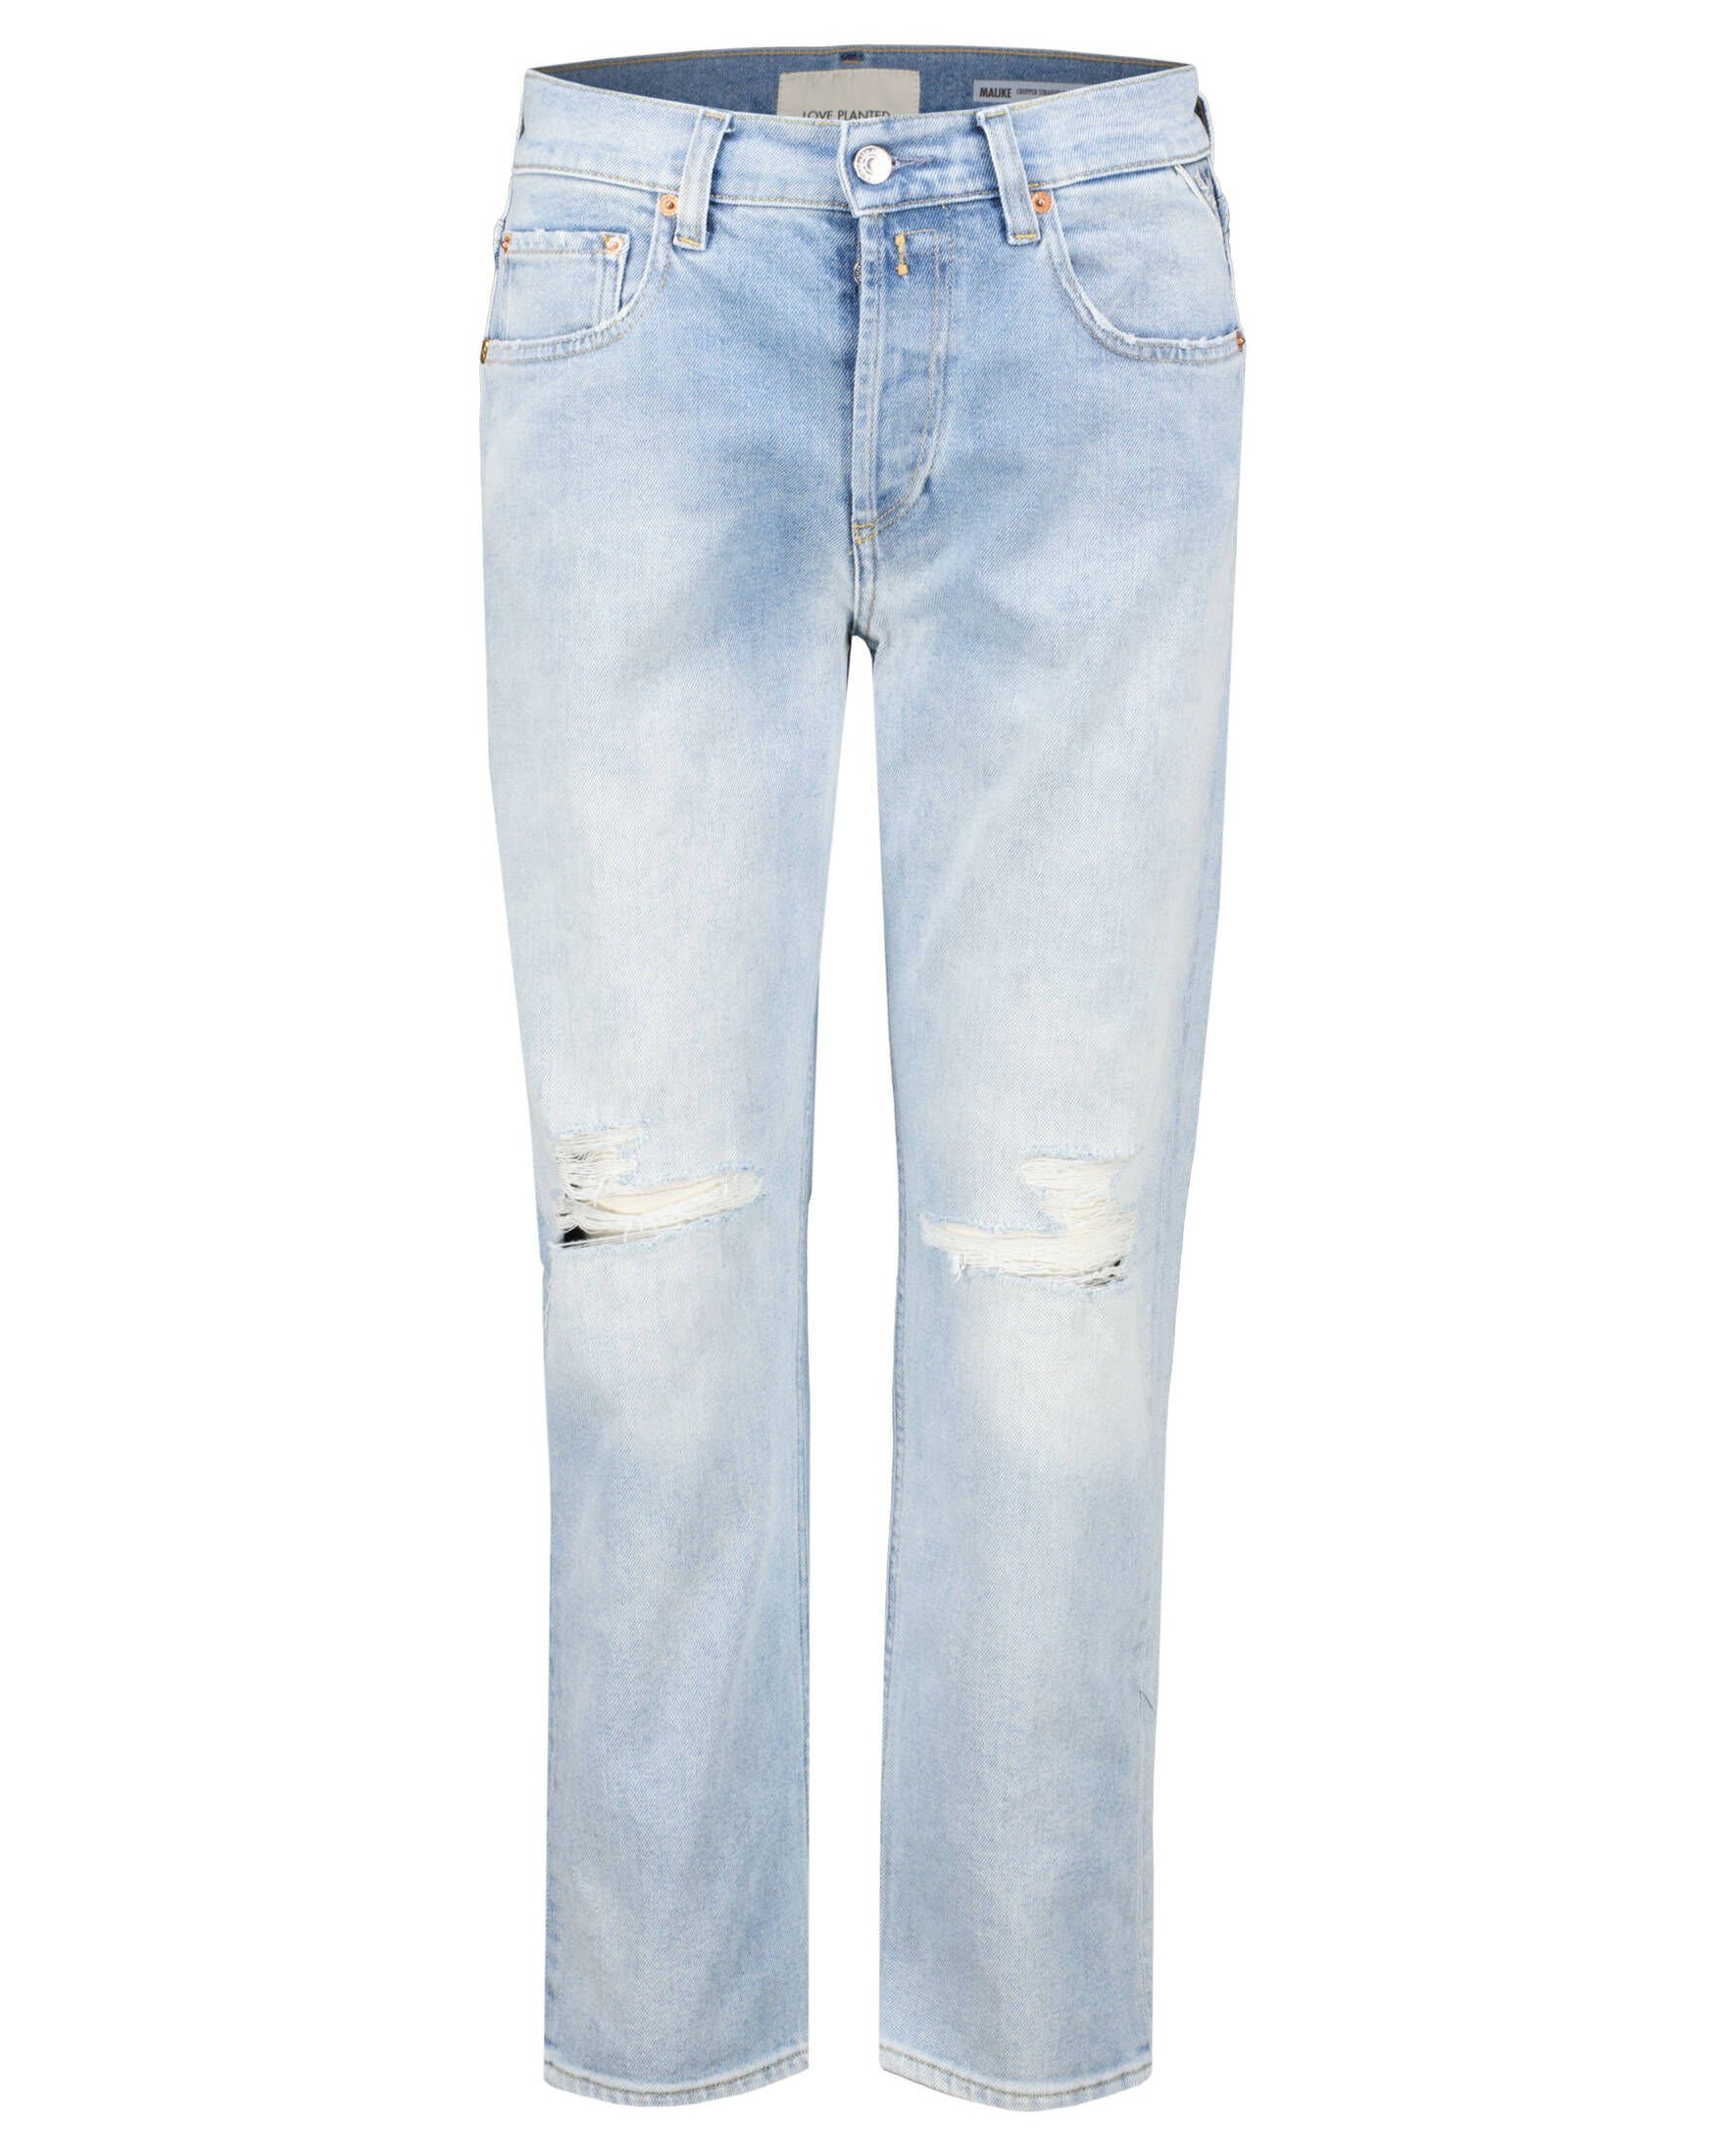 Replay 5-Pocket-Jeans (1-tlg)